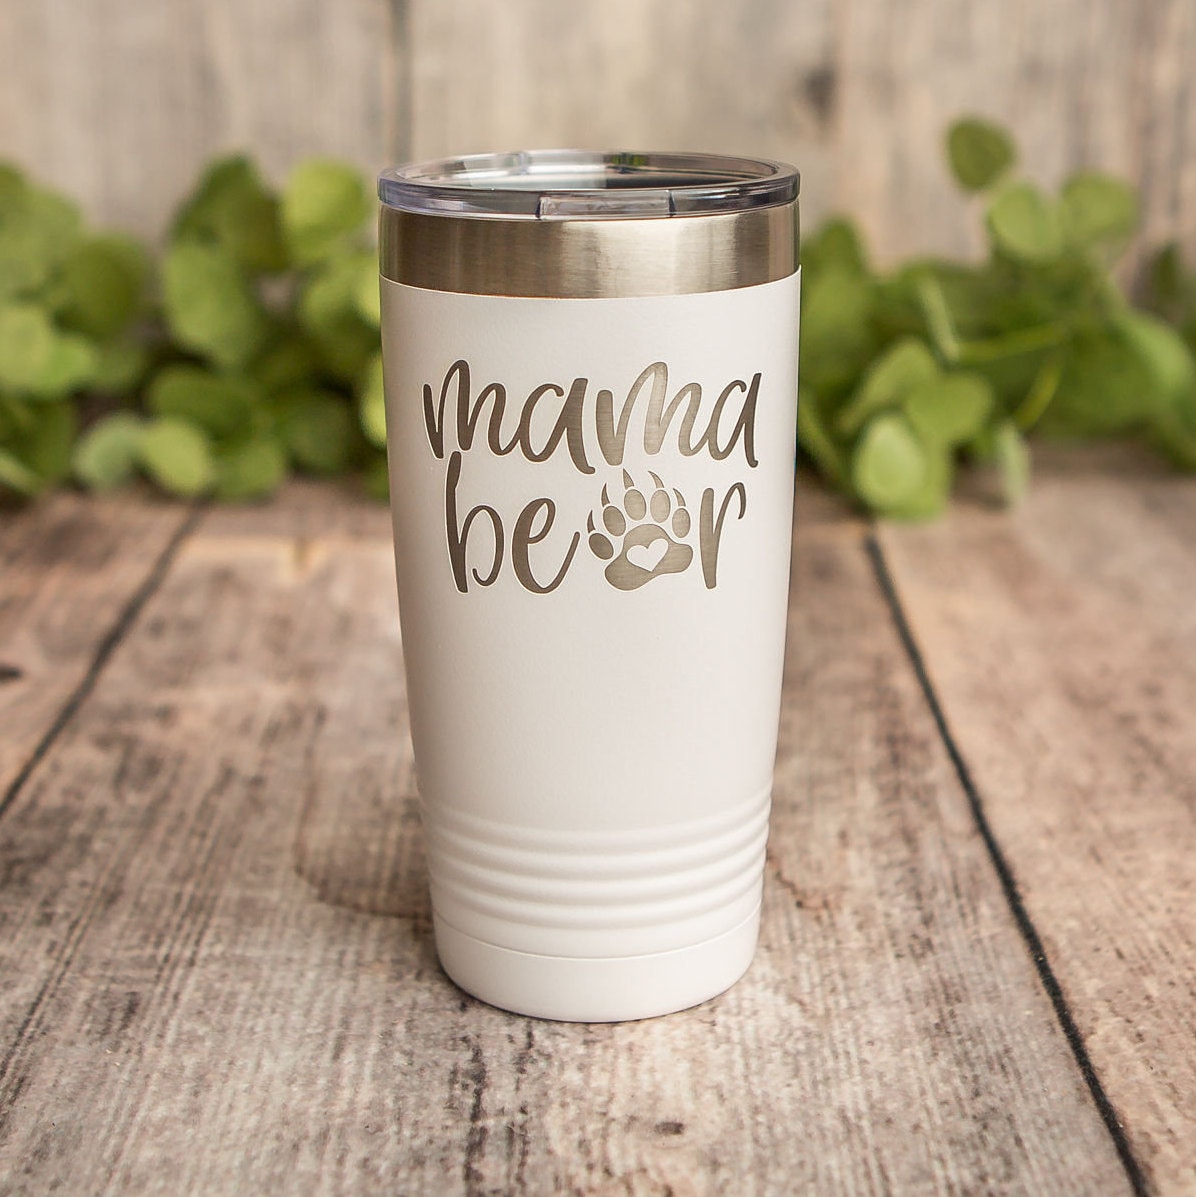 Mama Needs Coffee - Laser Engraved Coffee Lovers YETI® or Polar Camel  Insulated Tumbler